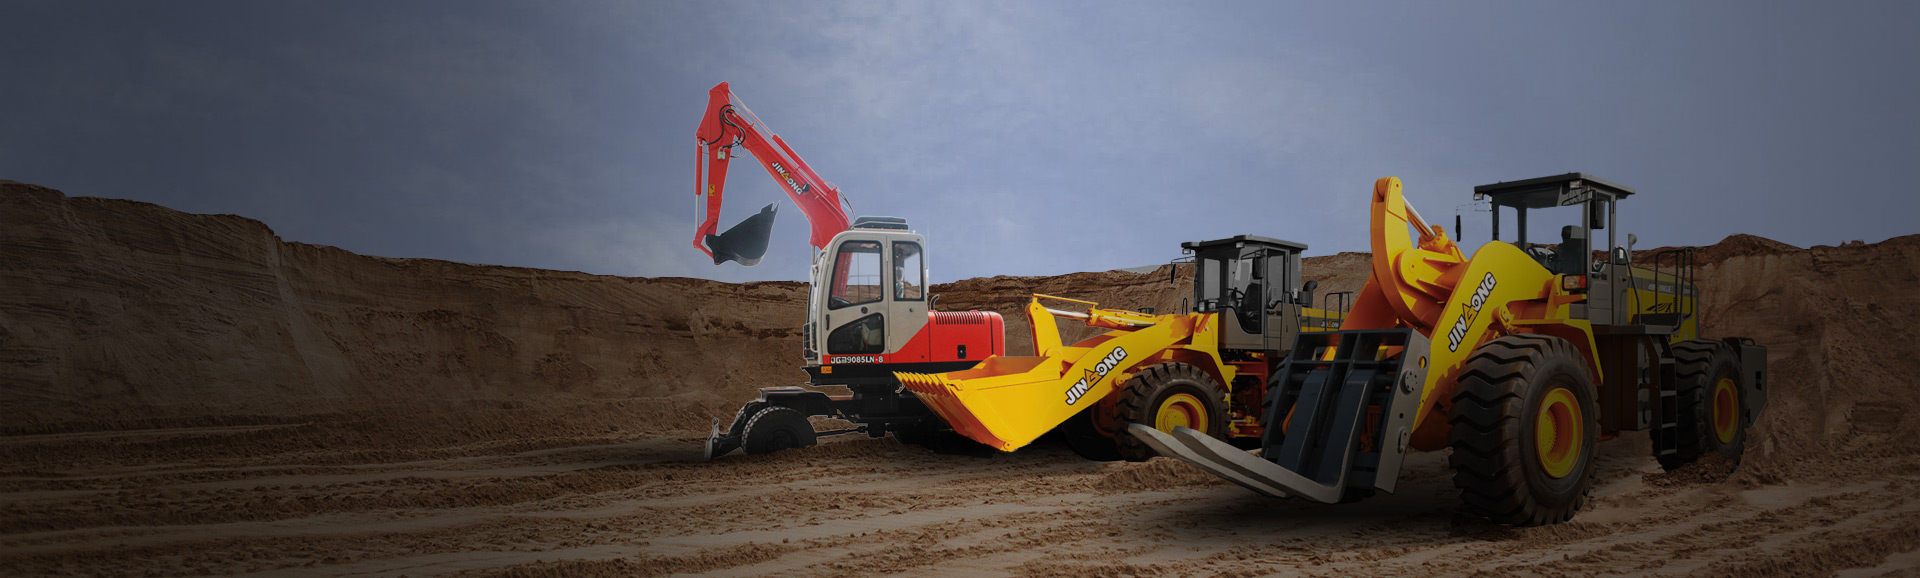 LEADING BRAND IN CHINA CONSTRUCTION MACHINERY INDUSTRY